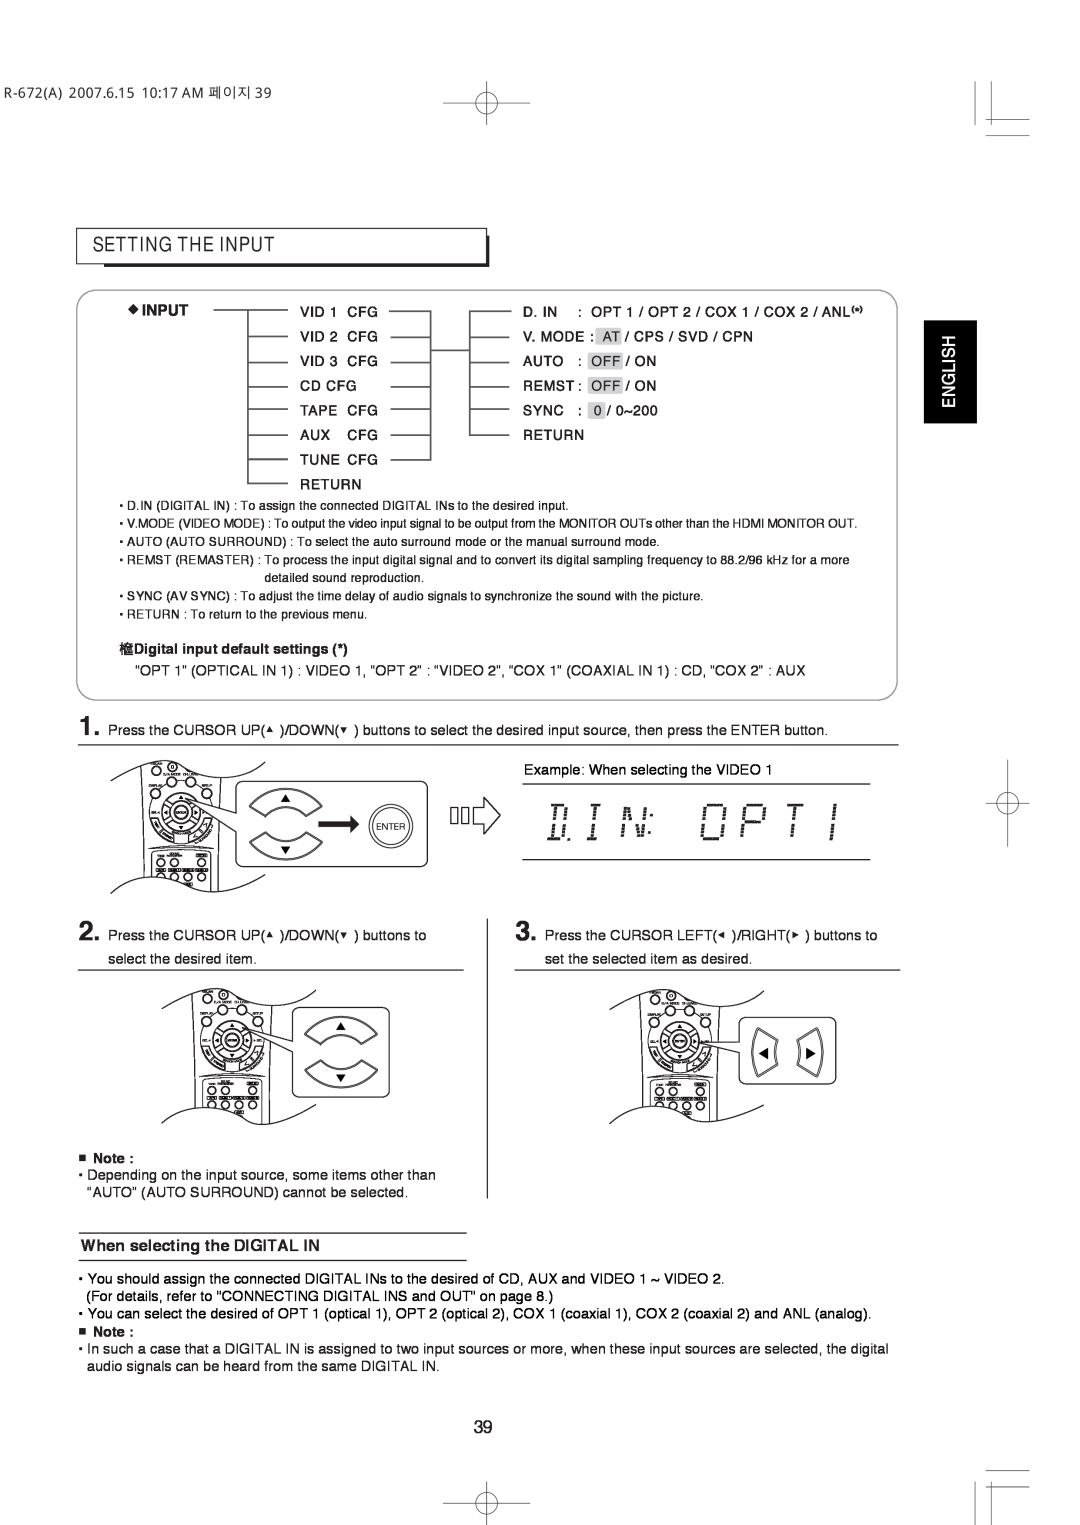 XM Satellite Radio manual Setting The Input, When selecting the DIGITAL IN, English, R-672A2007.6.15 10 17 AM 페이지 